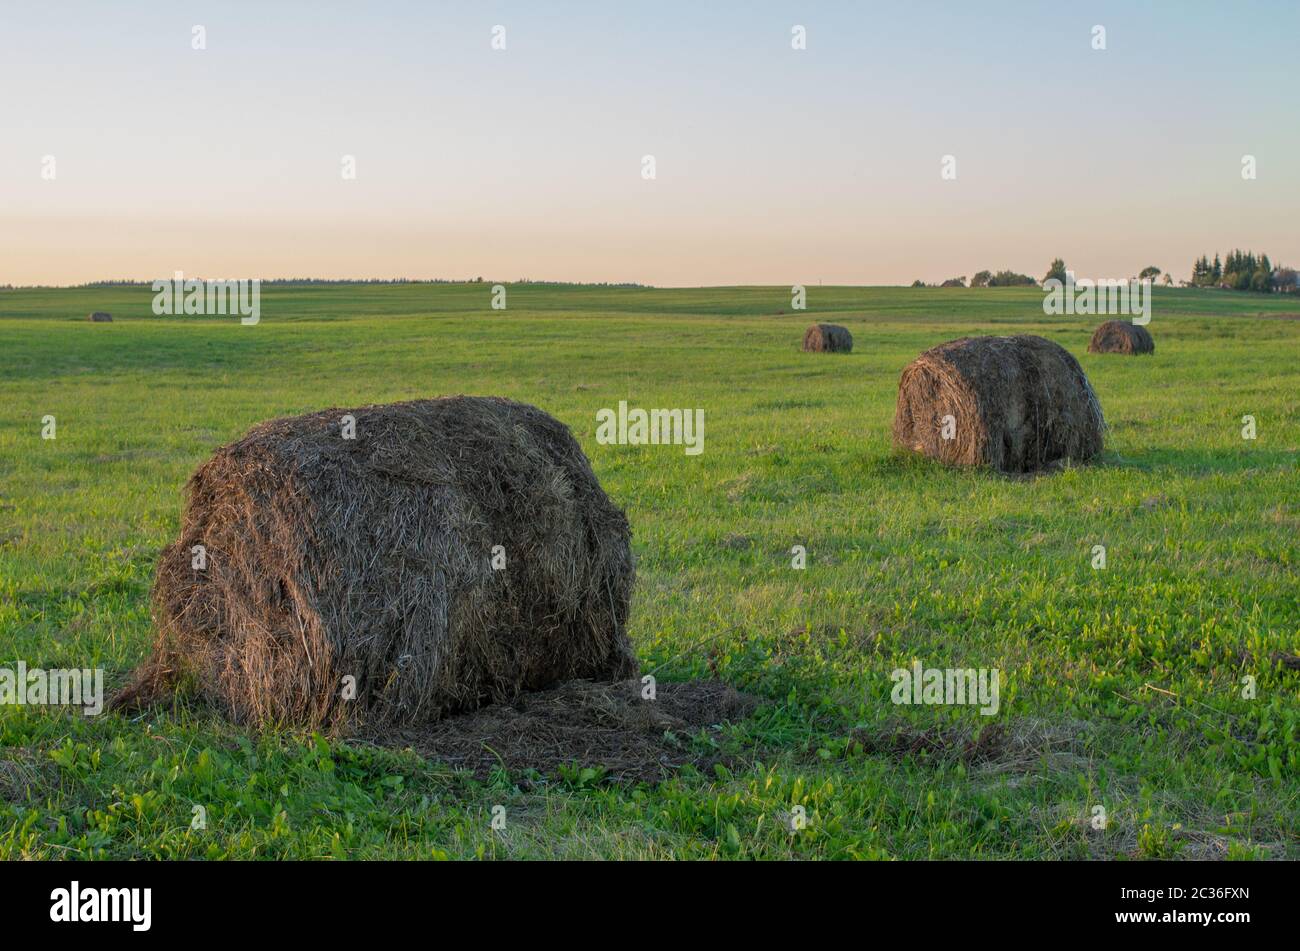 Large old baled round hay bales stacked out in the farm field. Stock Photo